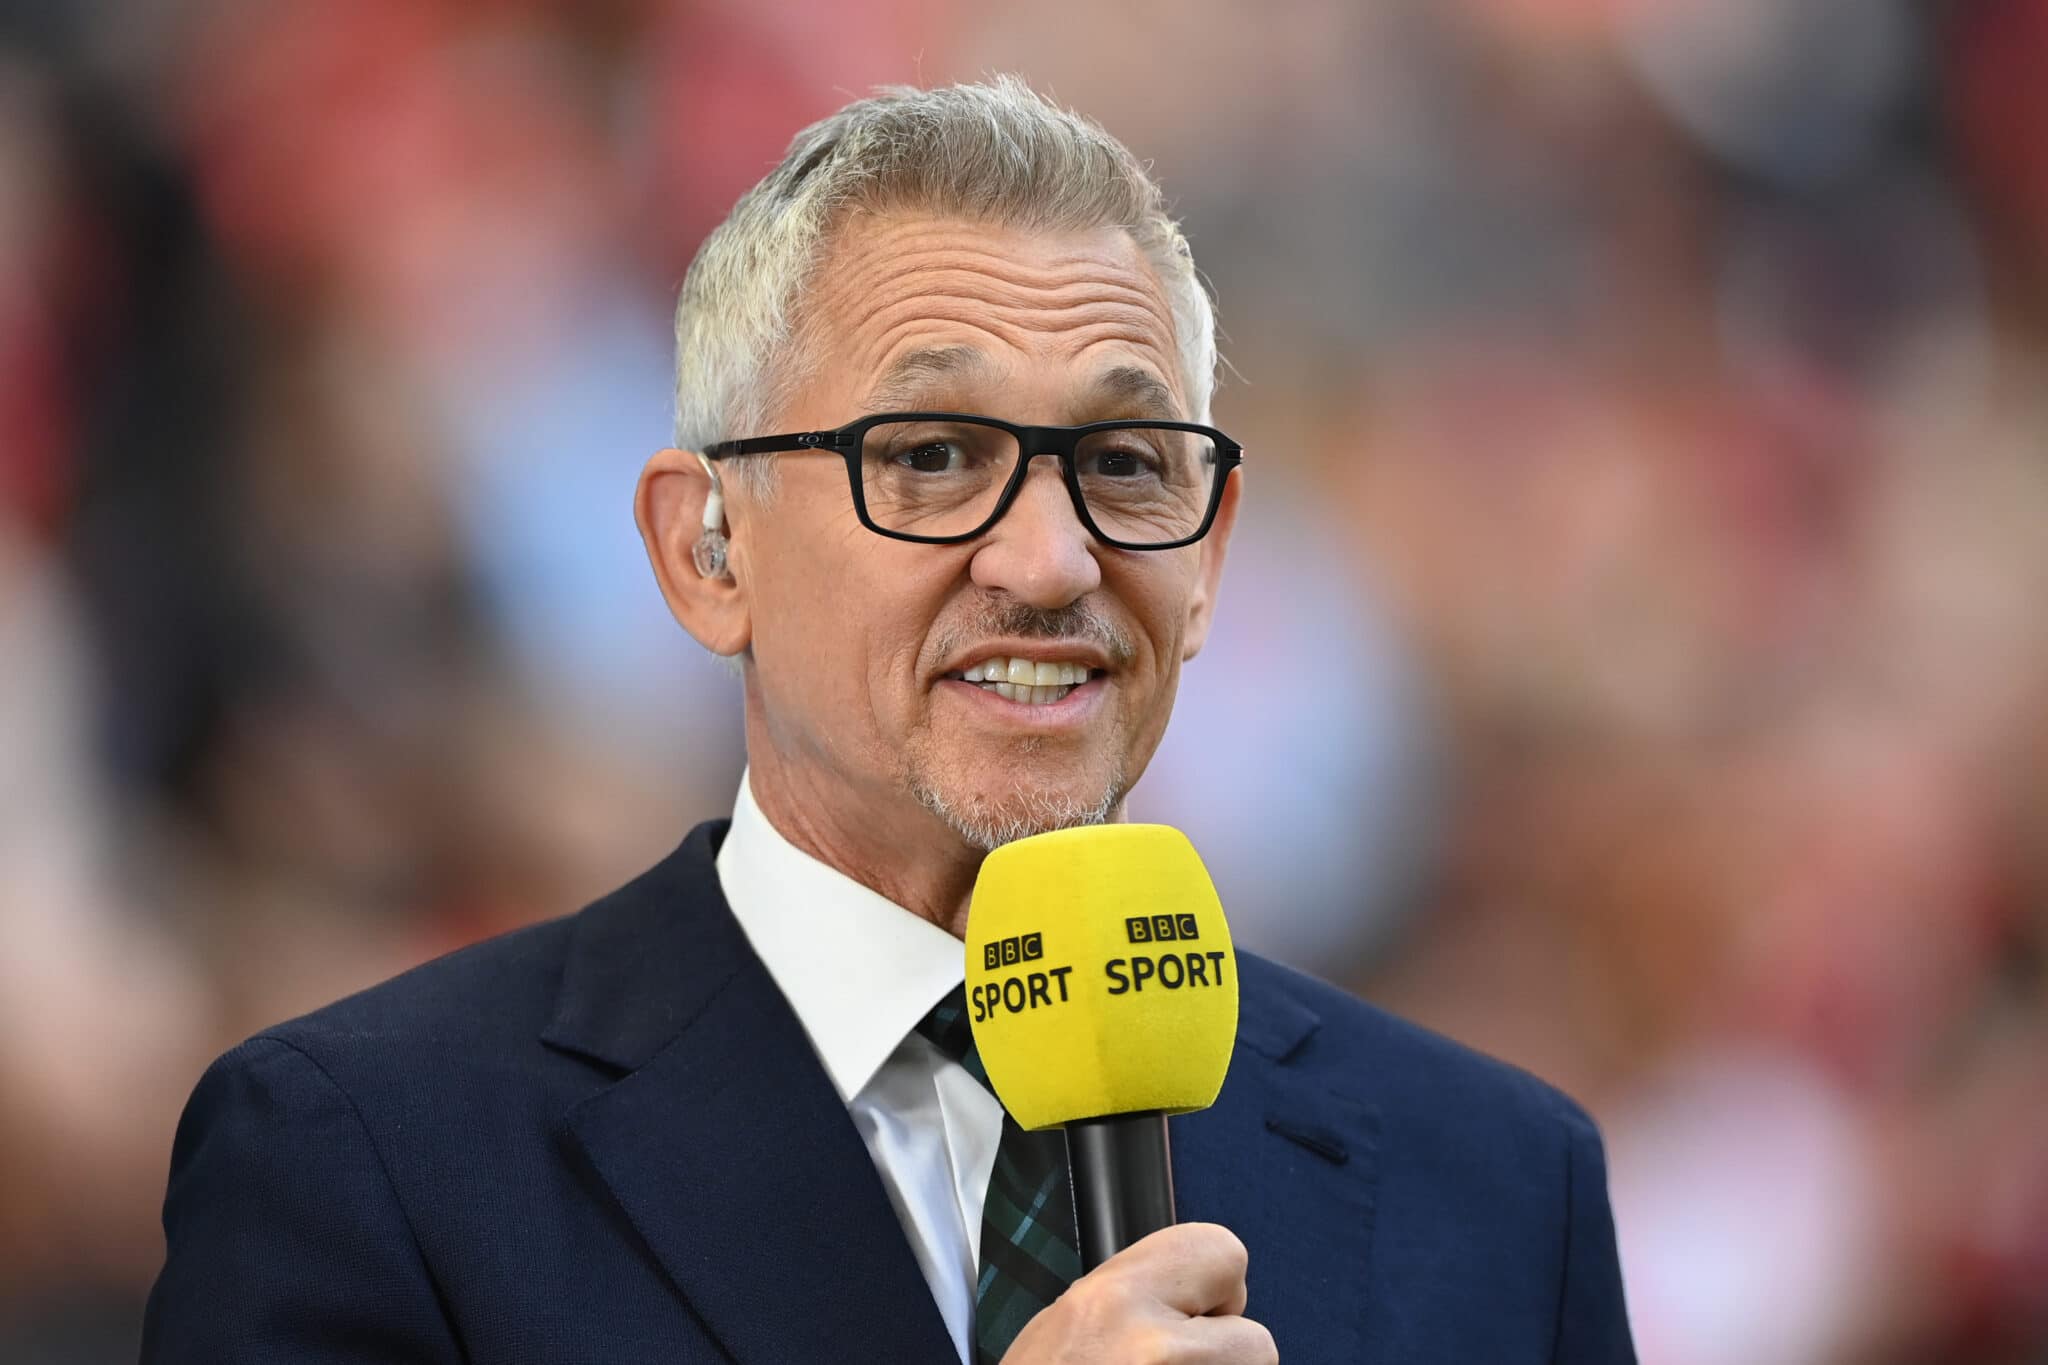 Gary Lineker presenting at a match for The BBC.